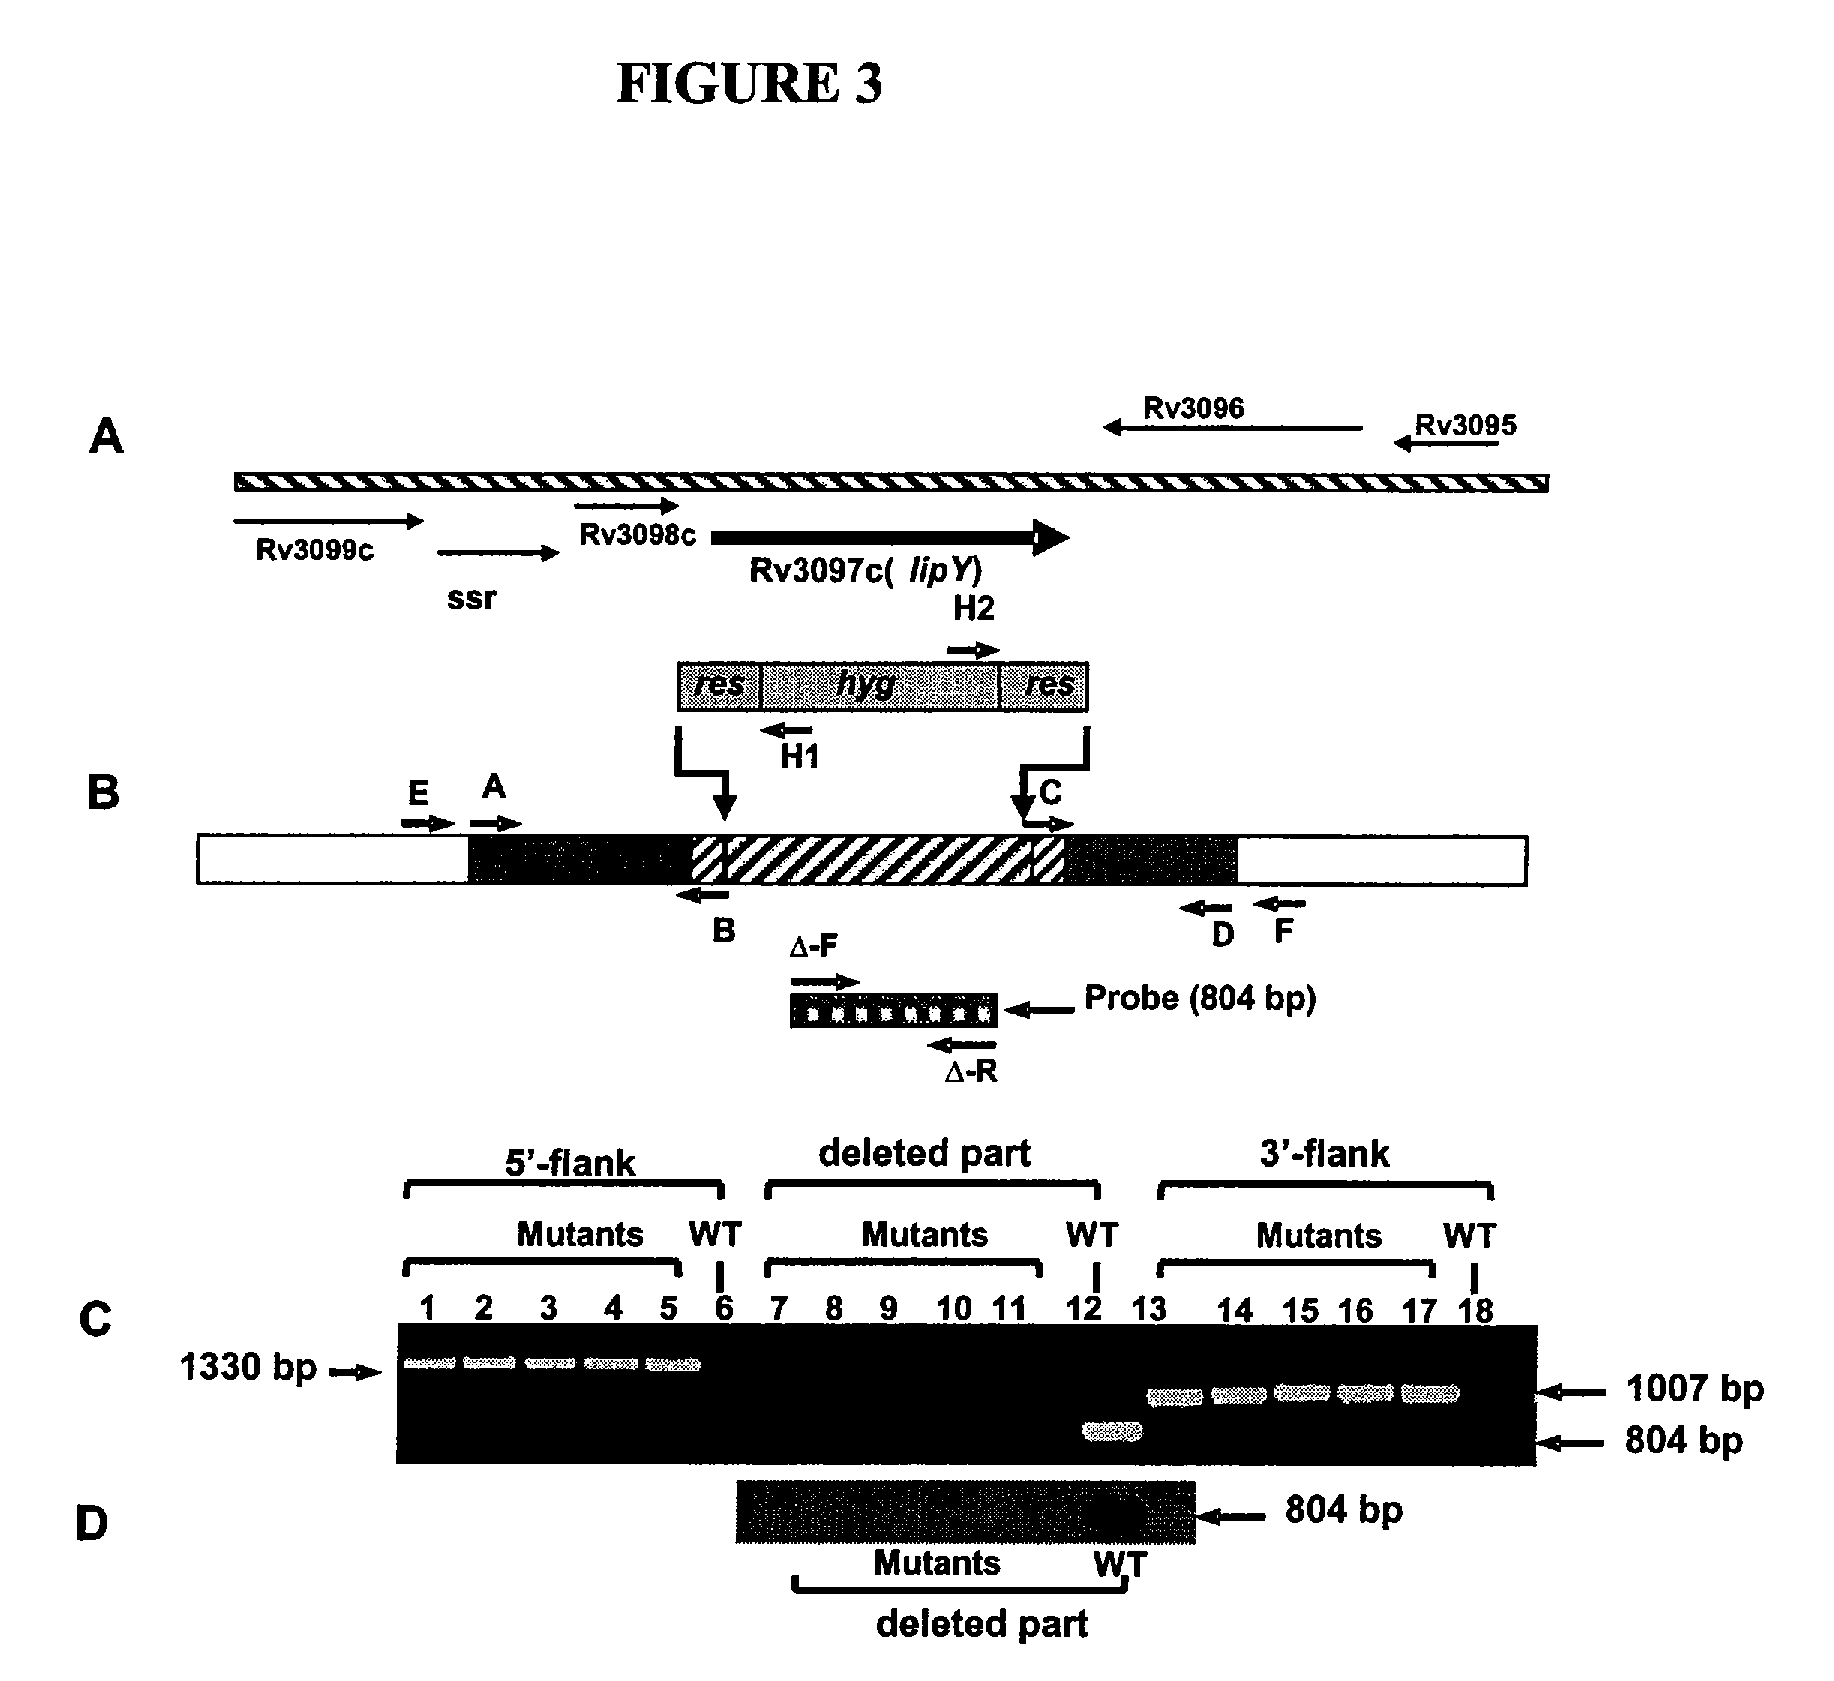 Targeting of long chain triacylglycerol hydrolase gene for tuberculosis treatment